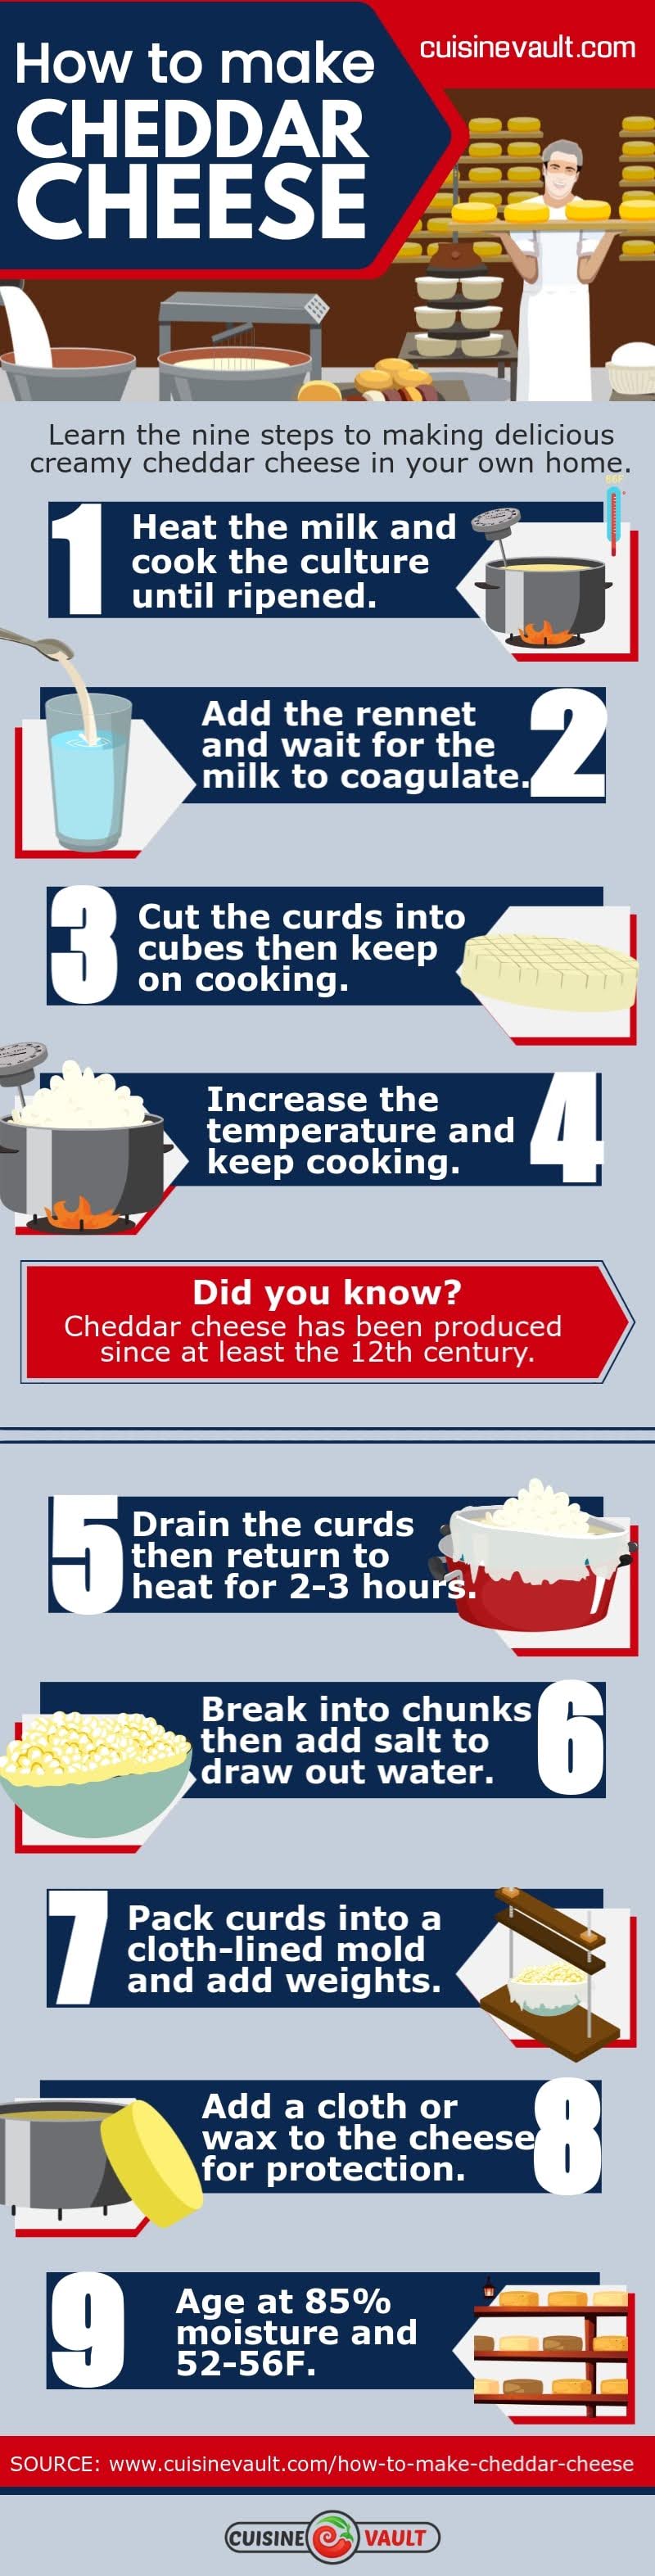 How to Make Cheddar Cheese #infographic